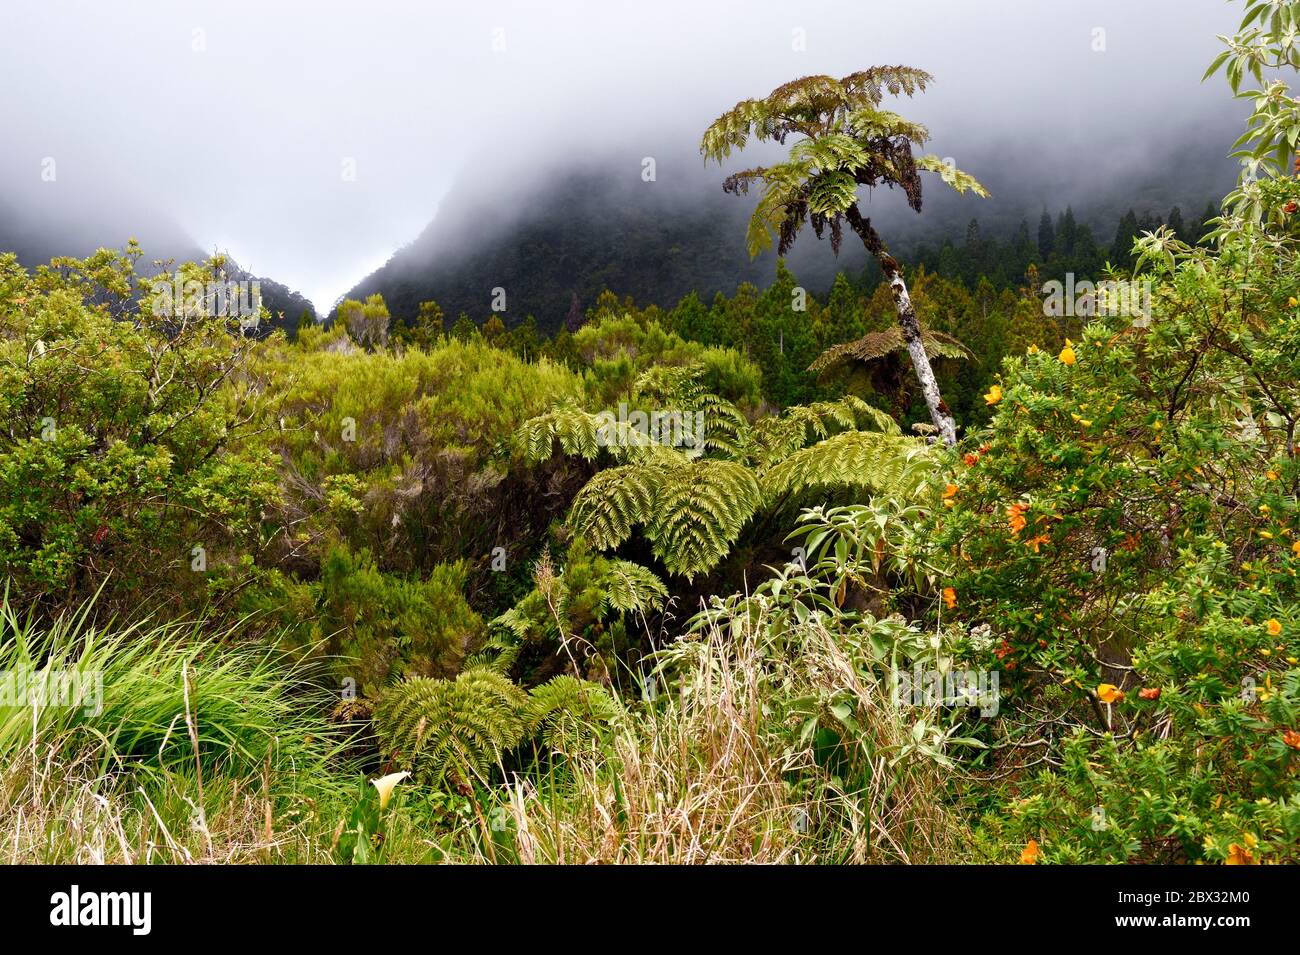 France, Reunion island (French overseas department), Reunion National Park listed as World heritage by UNESCO, La Plaine des Palmistes, Bebour forest, Bras Cabot hiking trail, tree ferns (Cyathea glauca) Stock Photo